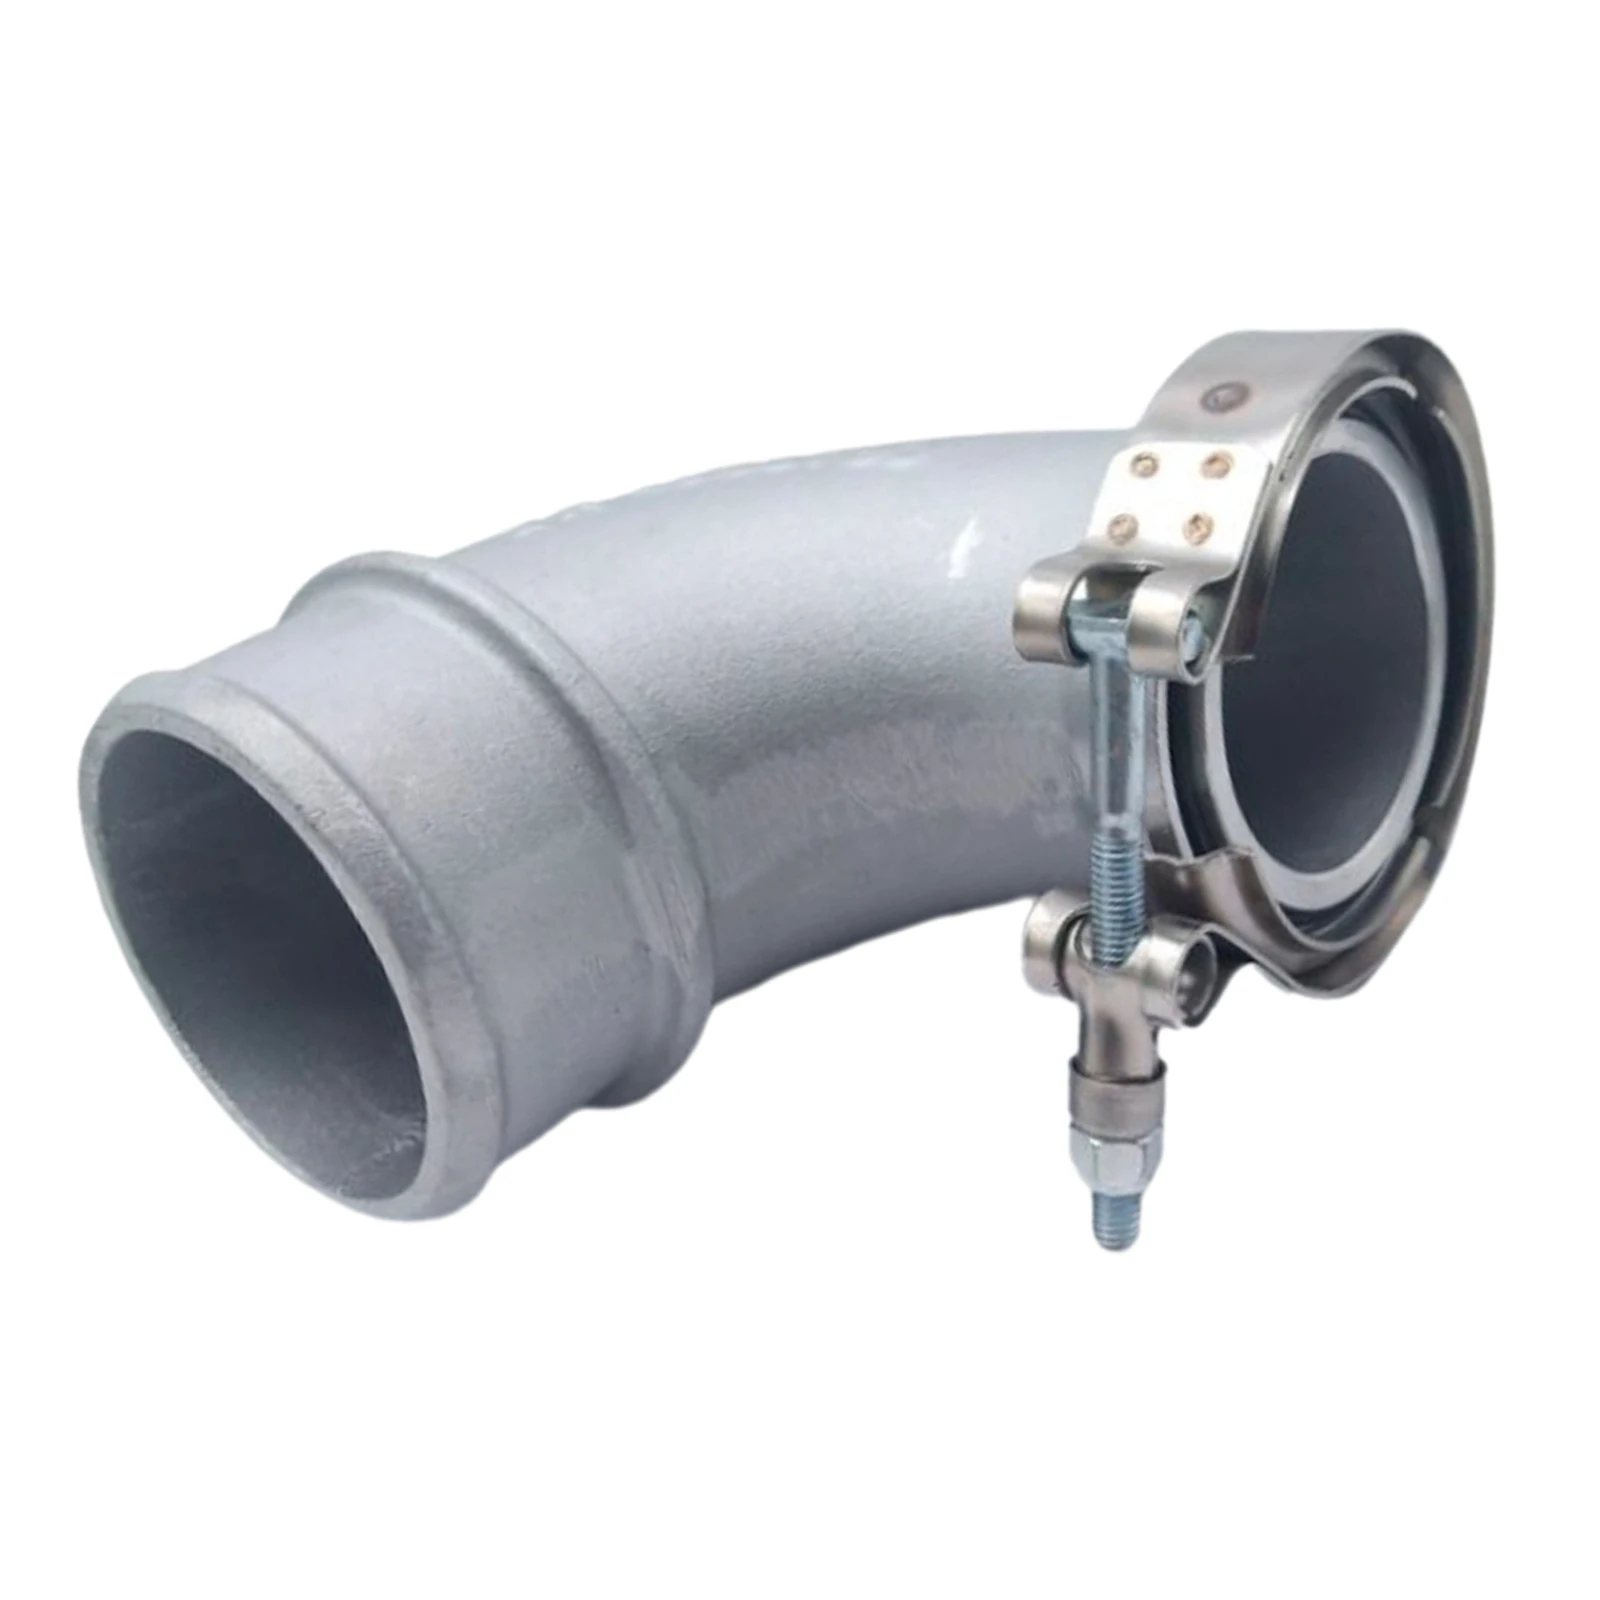 Turbo Air Transfer Pipe Intake Elbow 90° Portable Excellent Quality Easy Installation for Cummins  HX40 4BT DAF